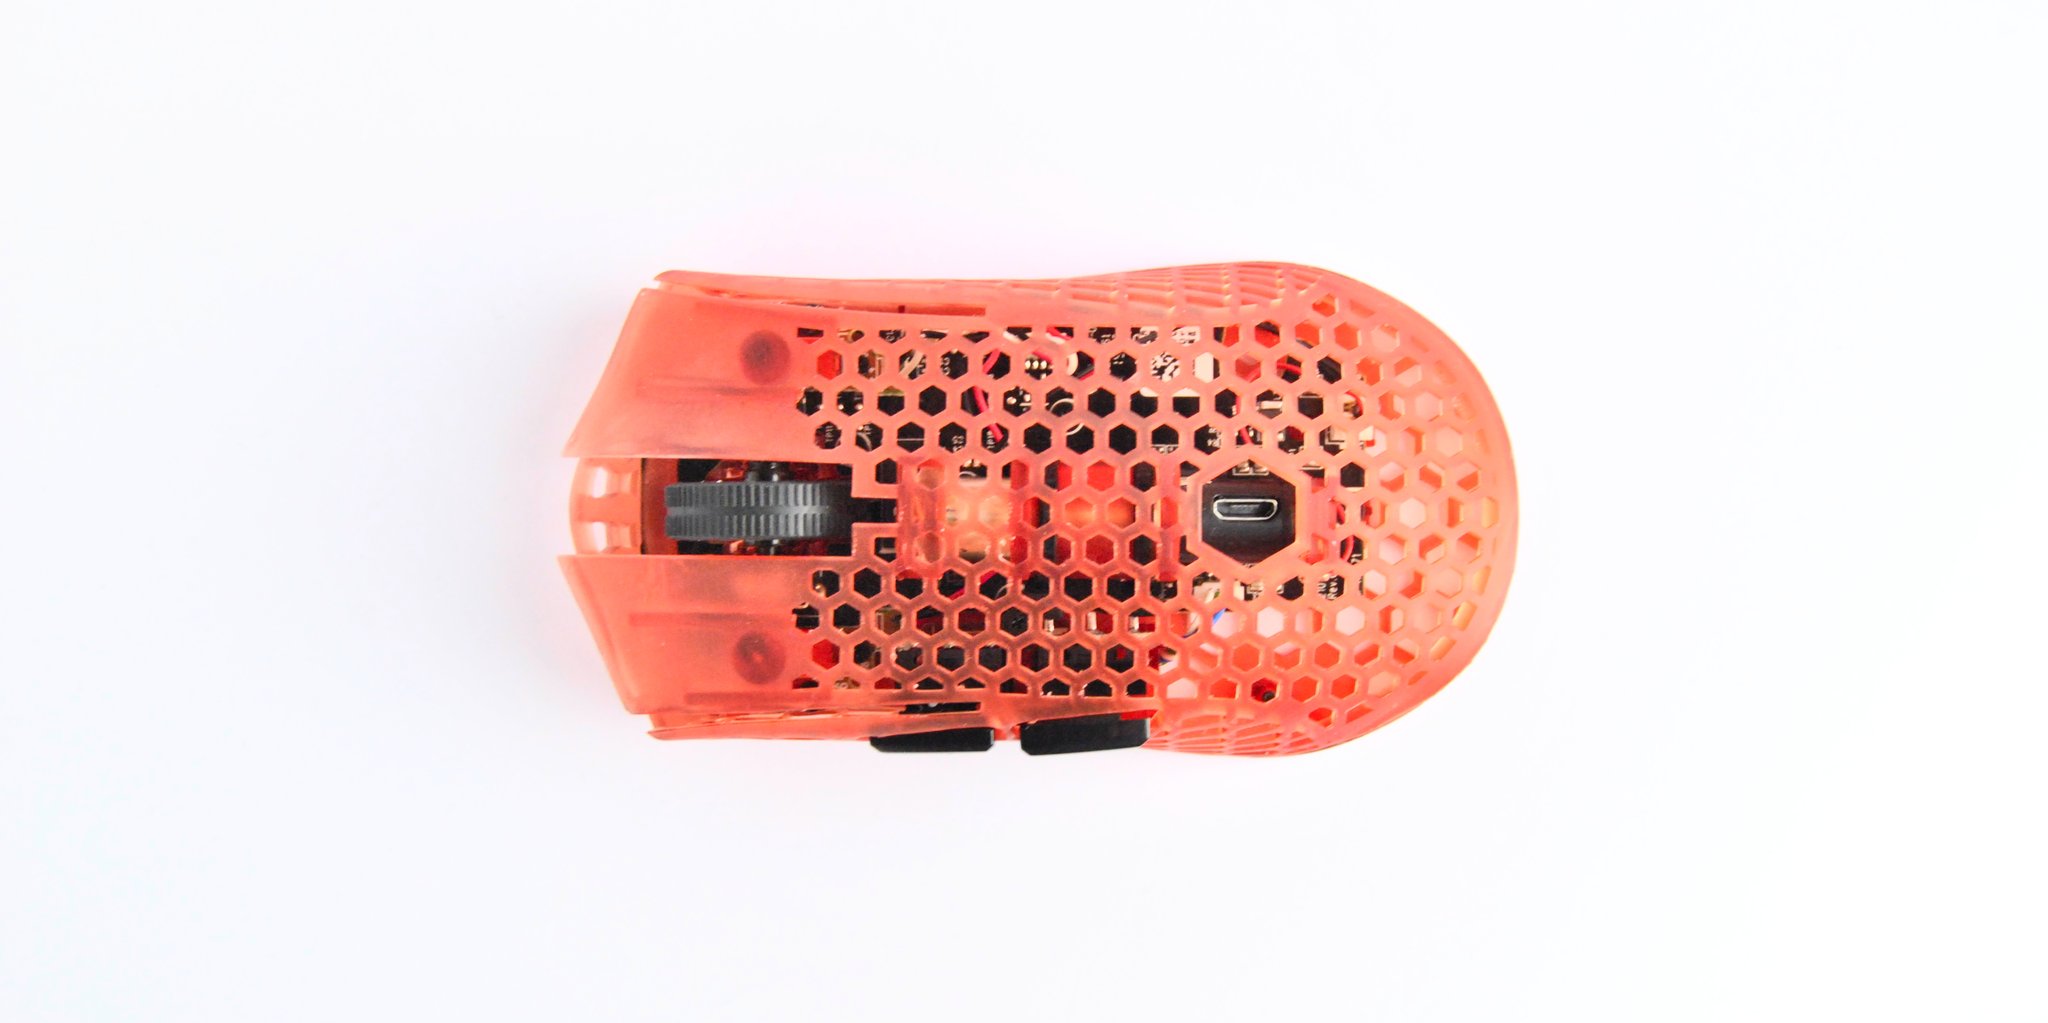 Piranha Mouse Mods Ultralight 2 Wireless In Red